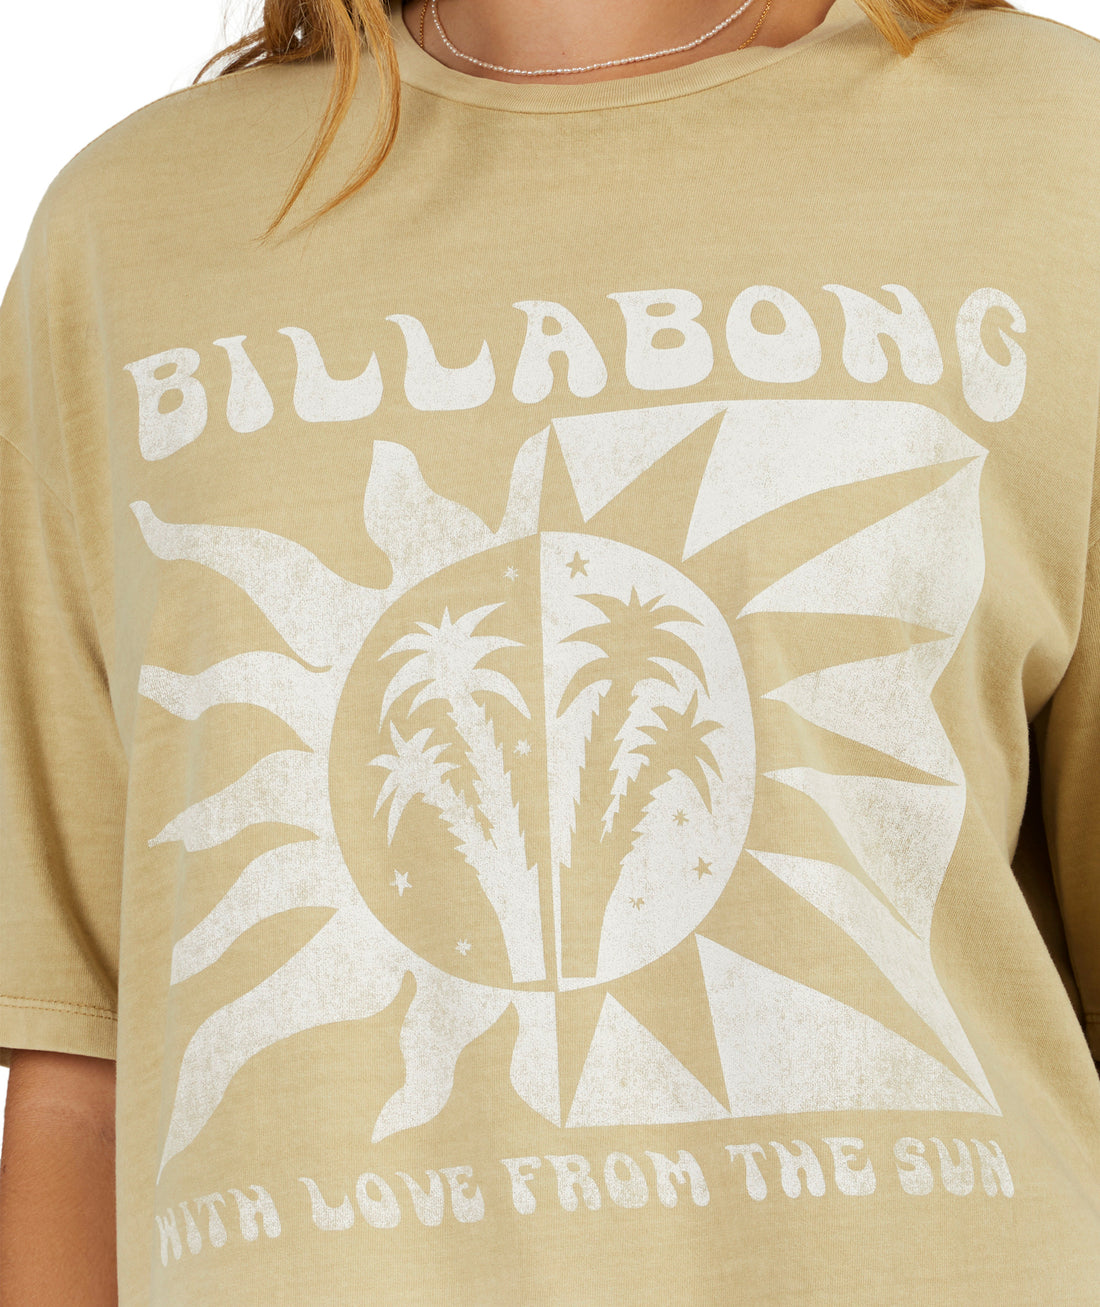 BILLABONG WITH LOVE FROM THE SUN TEE